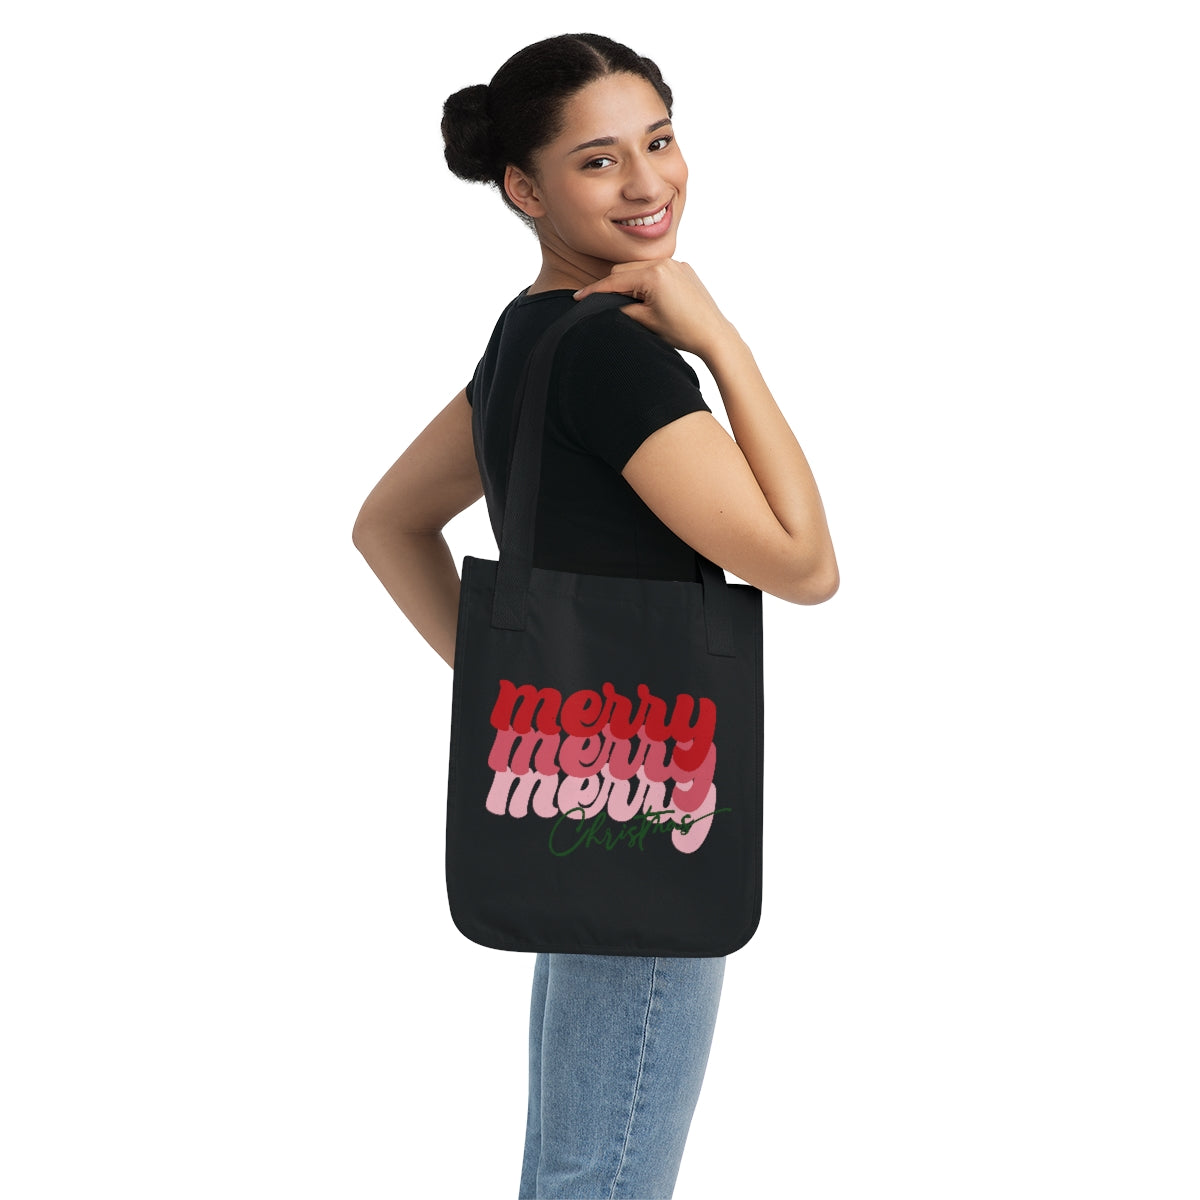 Merry Merry Merry Christmas Organic Canvas Tote Bag